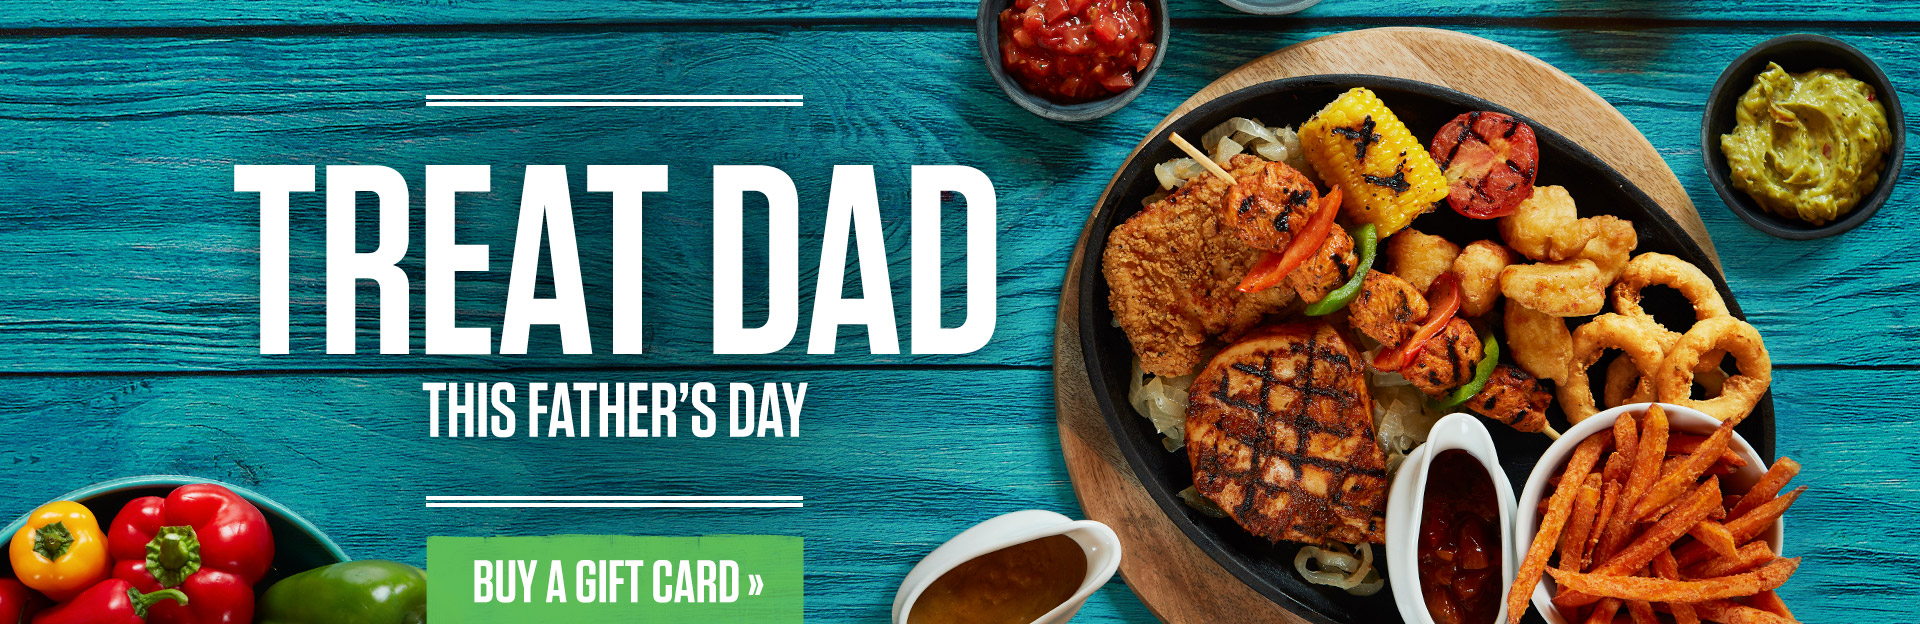 Father's Day at Sizzling Pubs